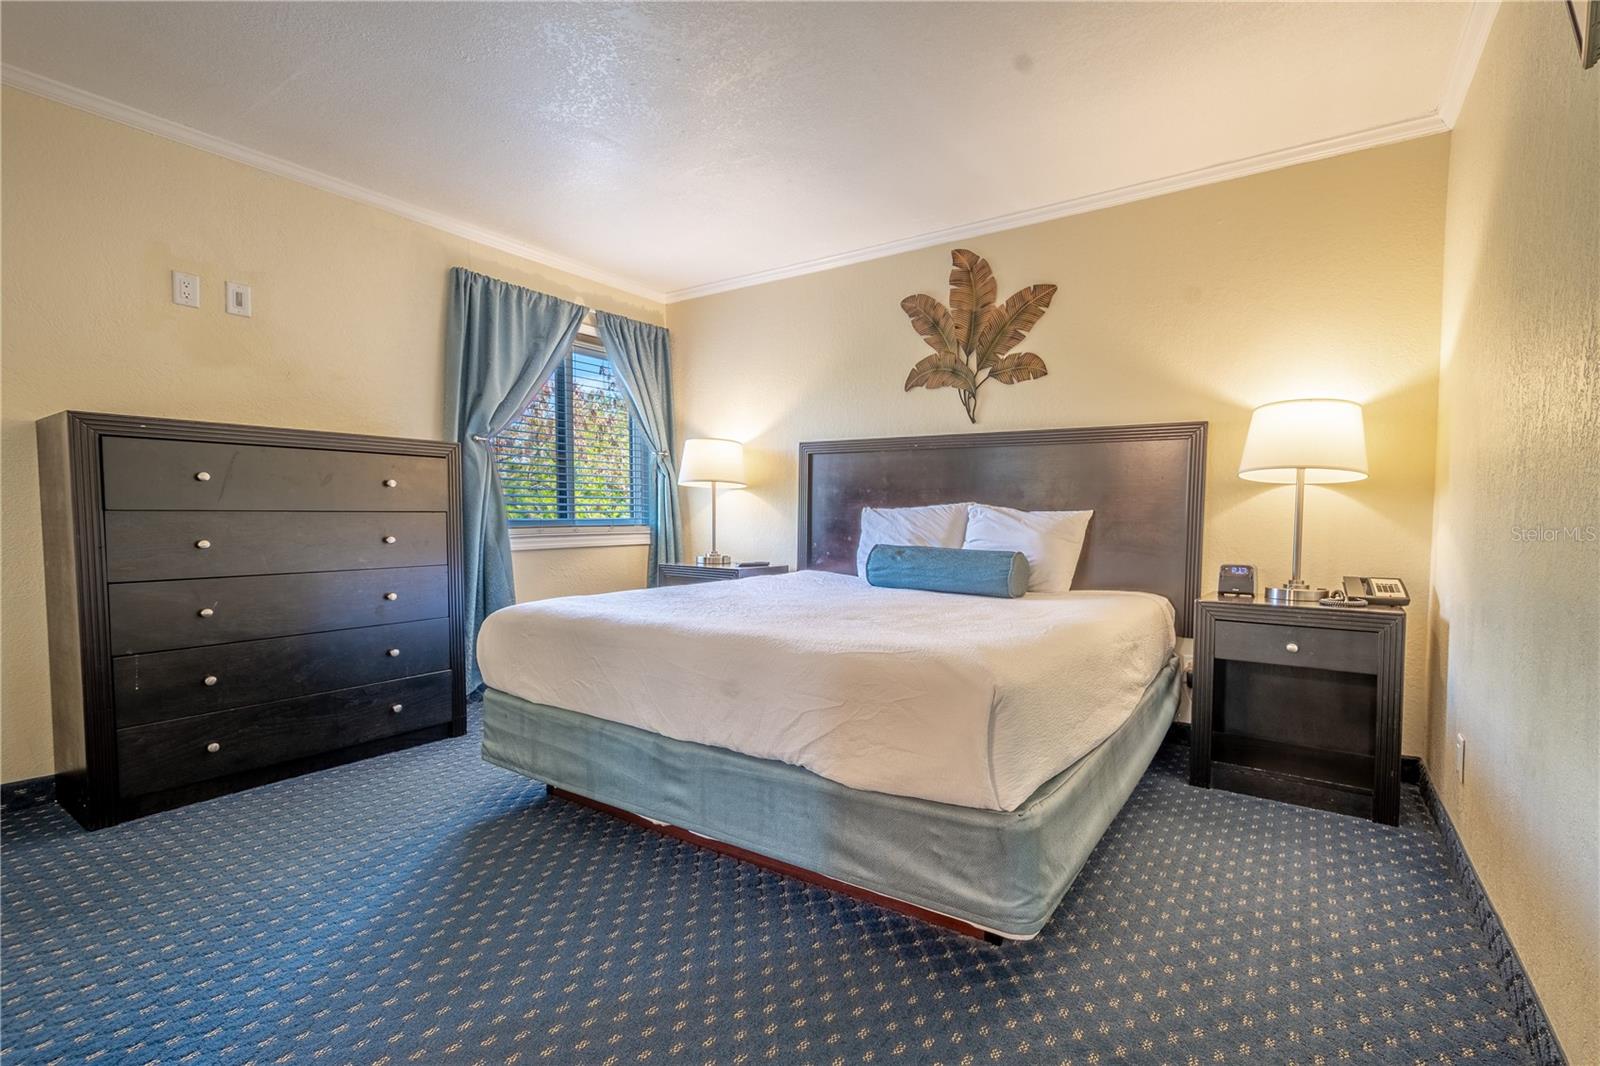 Primary bedroom is fully furnished including a king size bed.